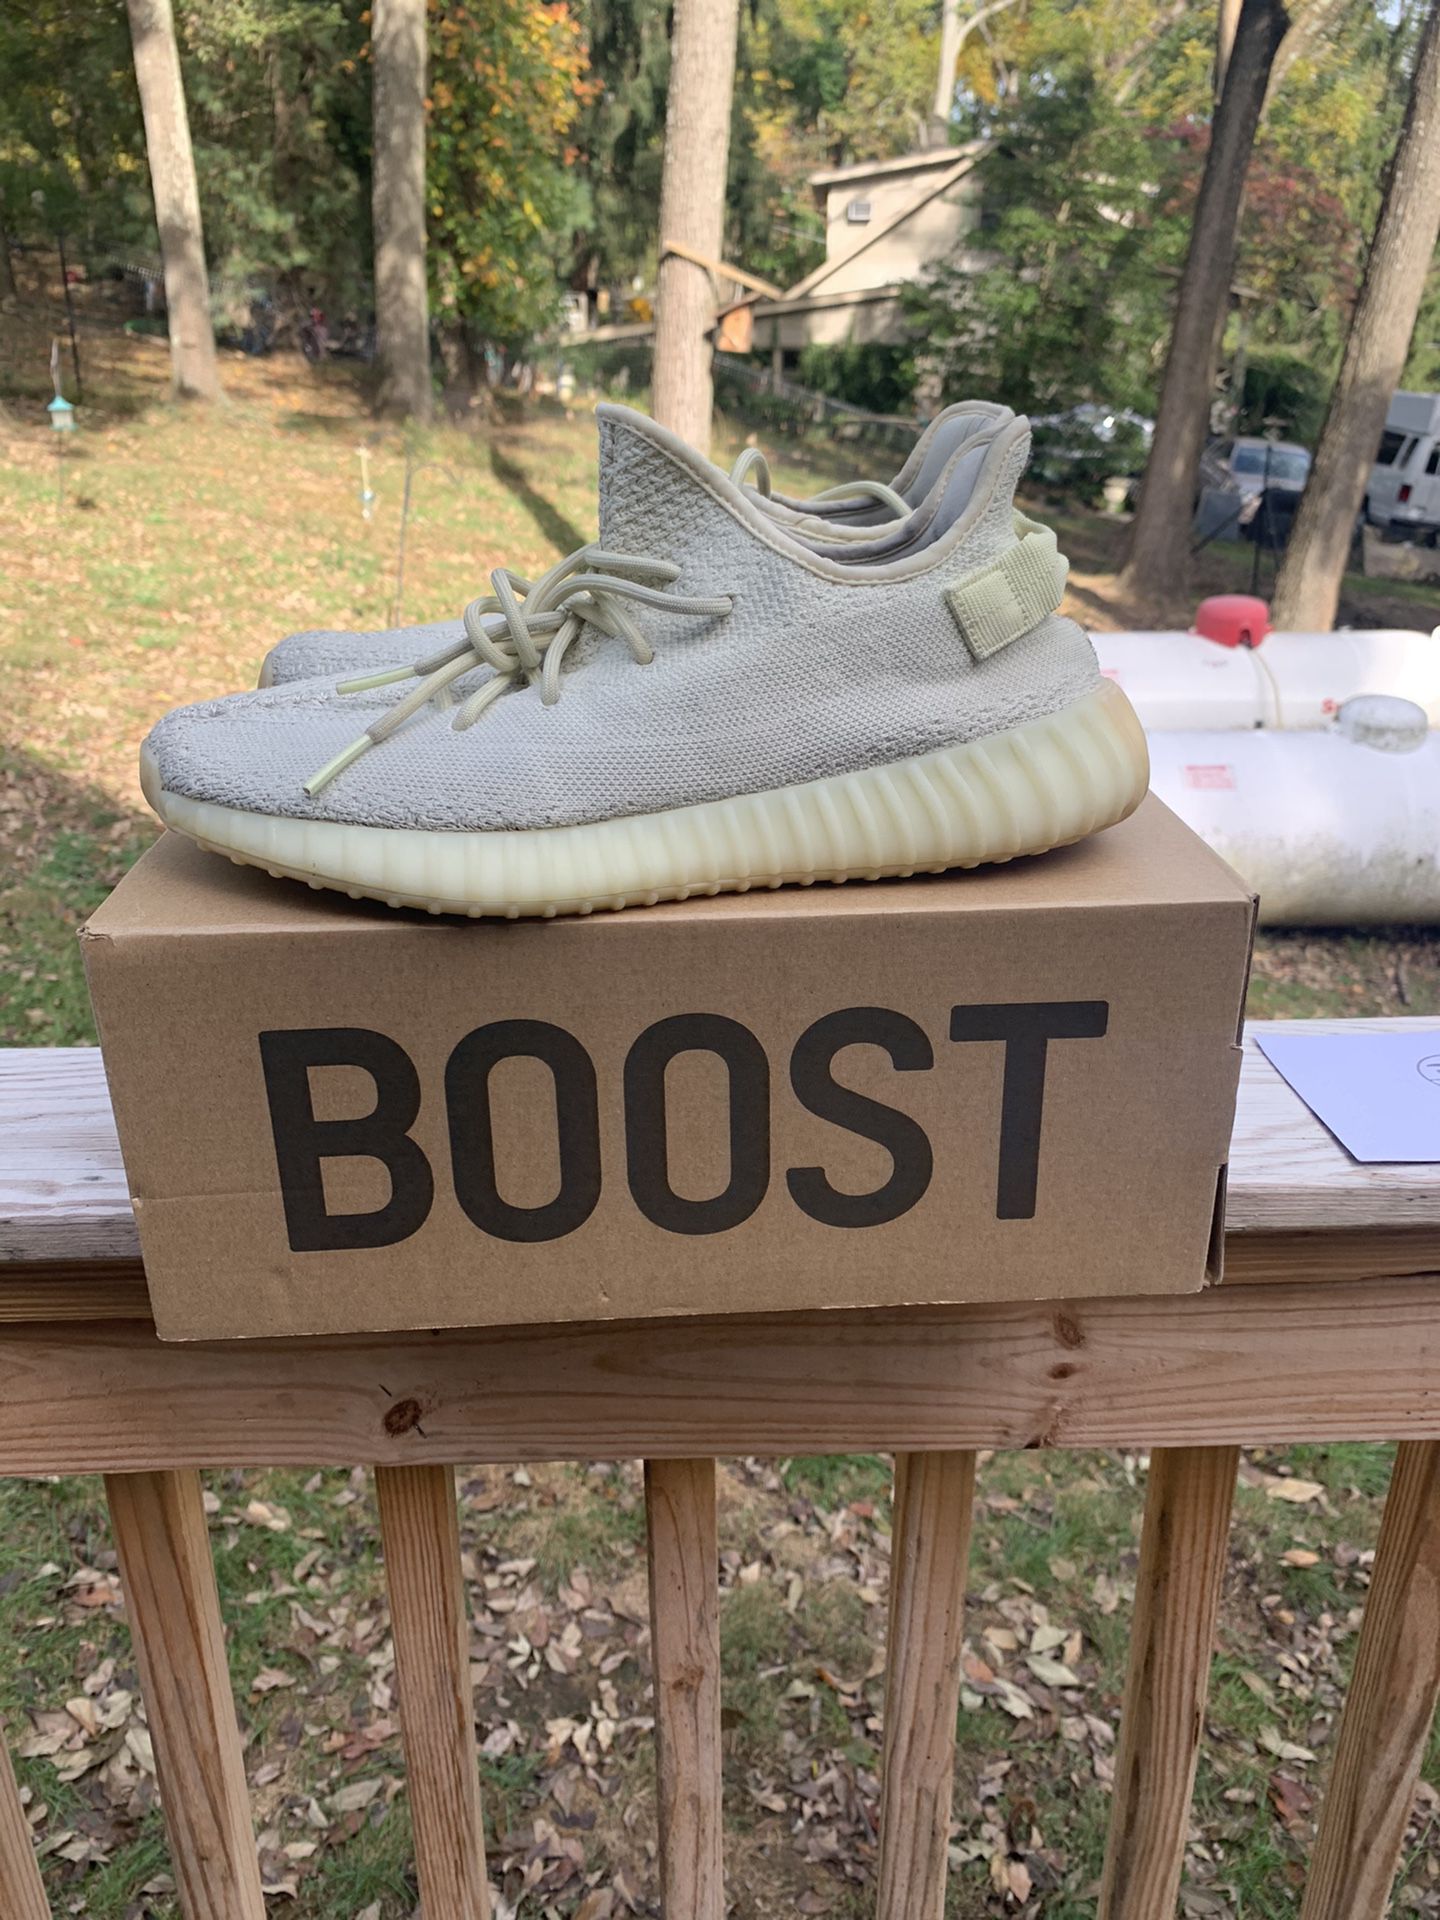 Adidas Yeezy Boost 350 “Butter” size 11